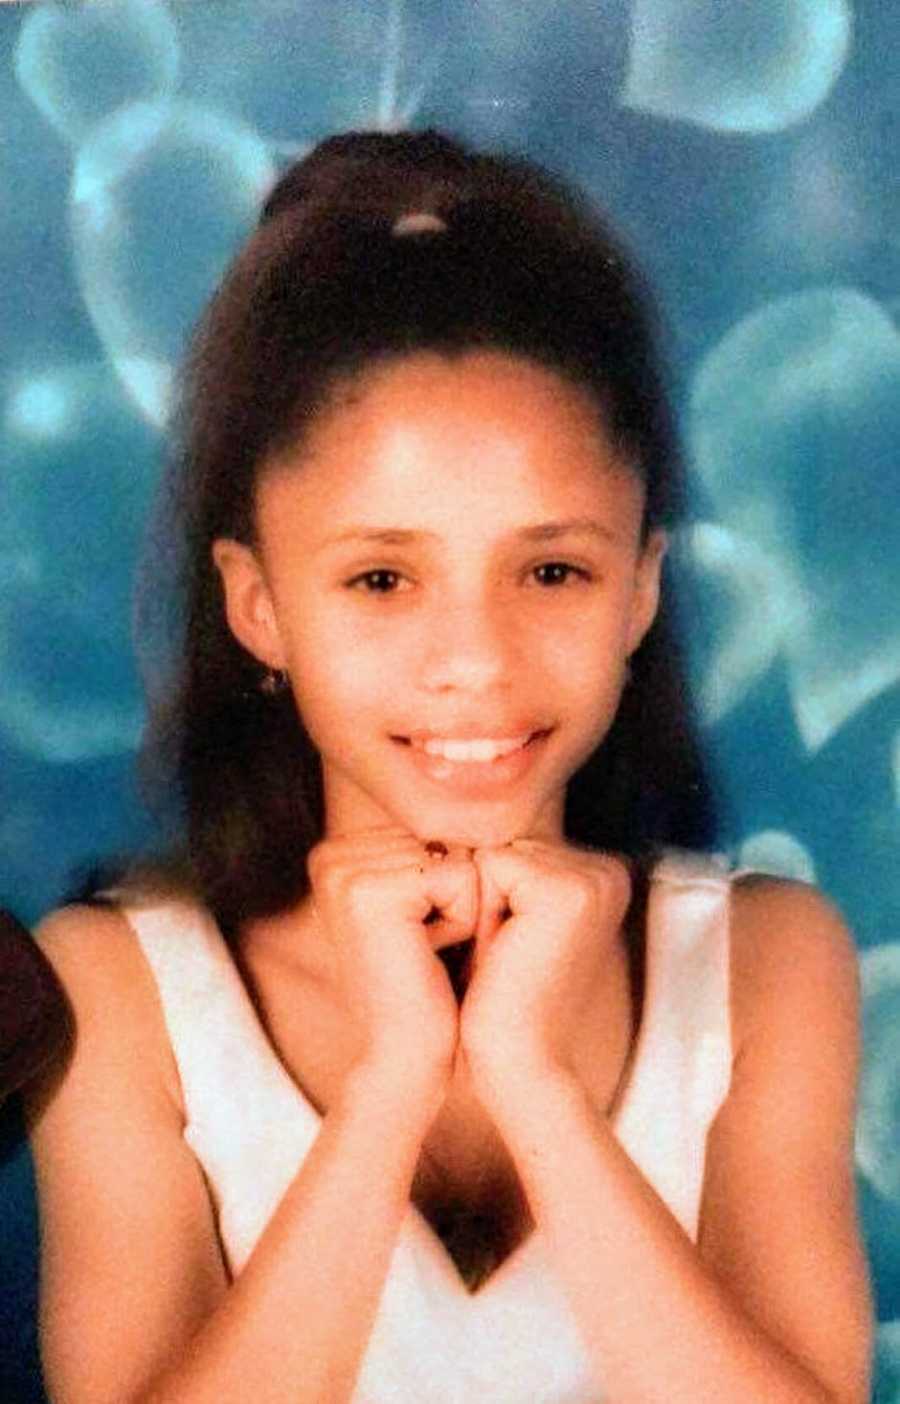 Young girl poses for a school photo with a blue background